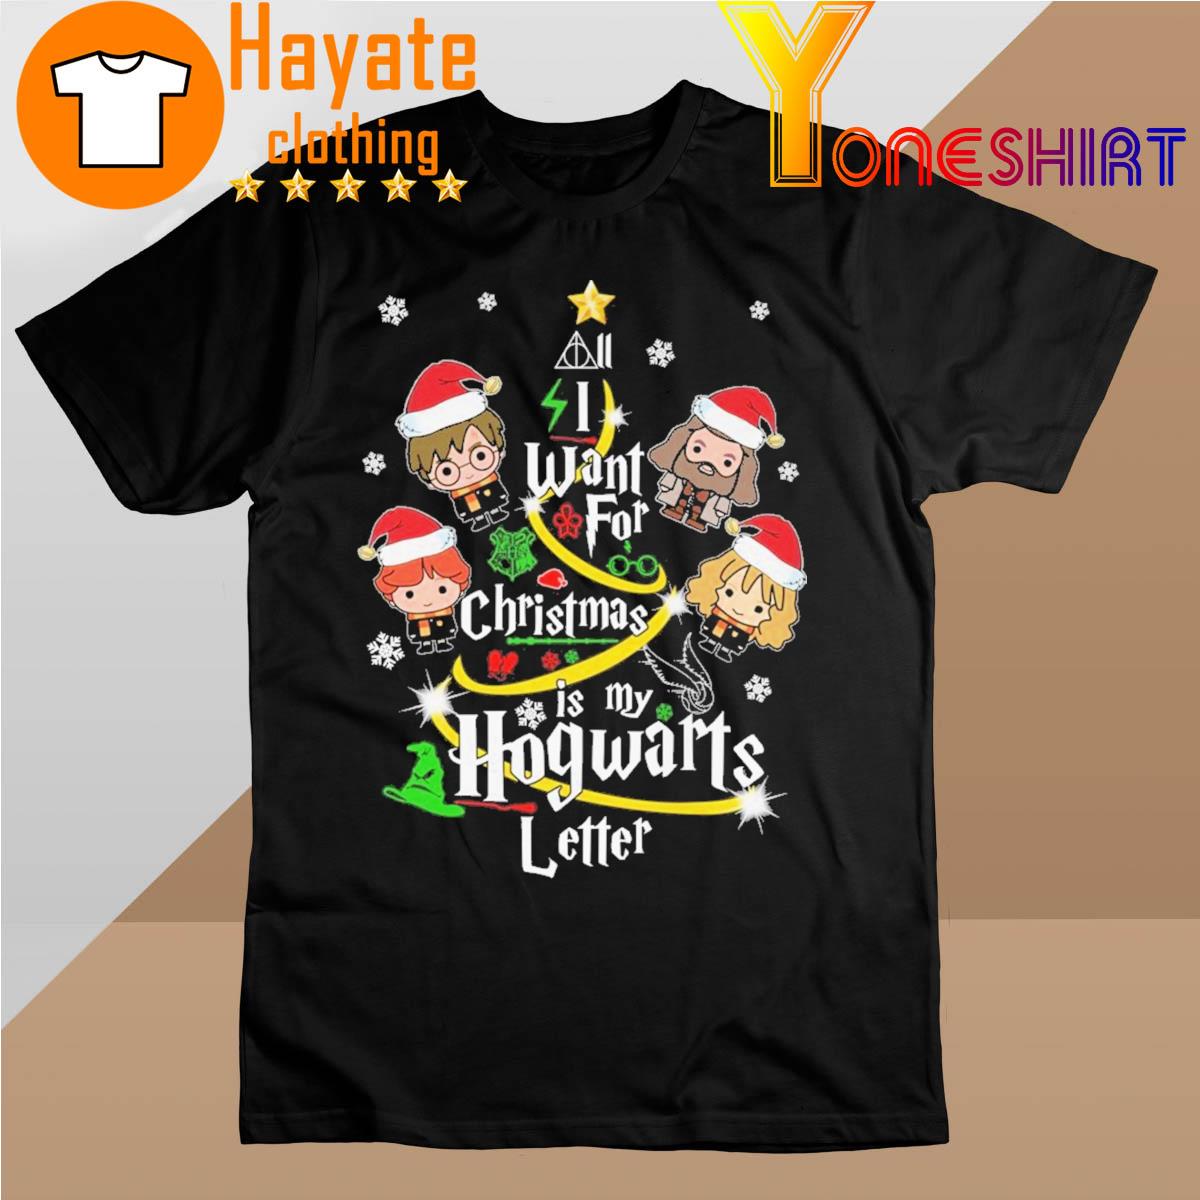 I Want for Christmas is my Hogwarts Letter Christmas Tree 2022 shirt